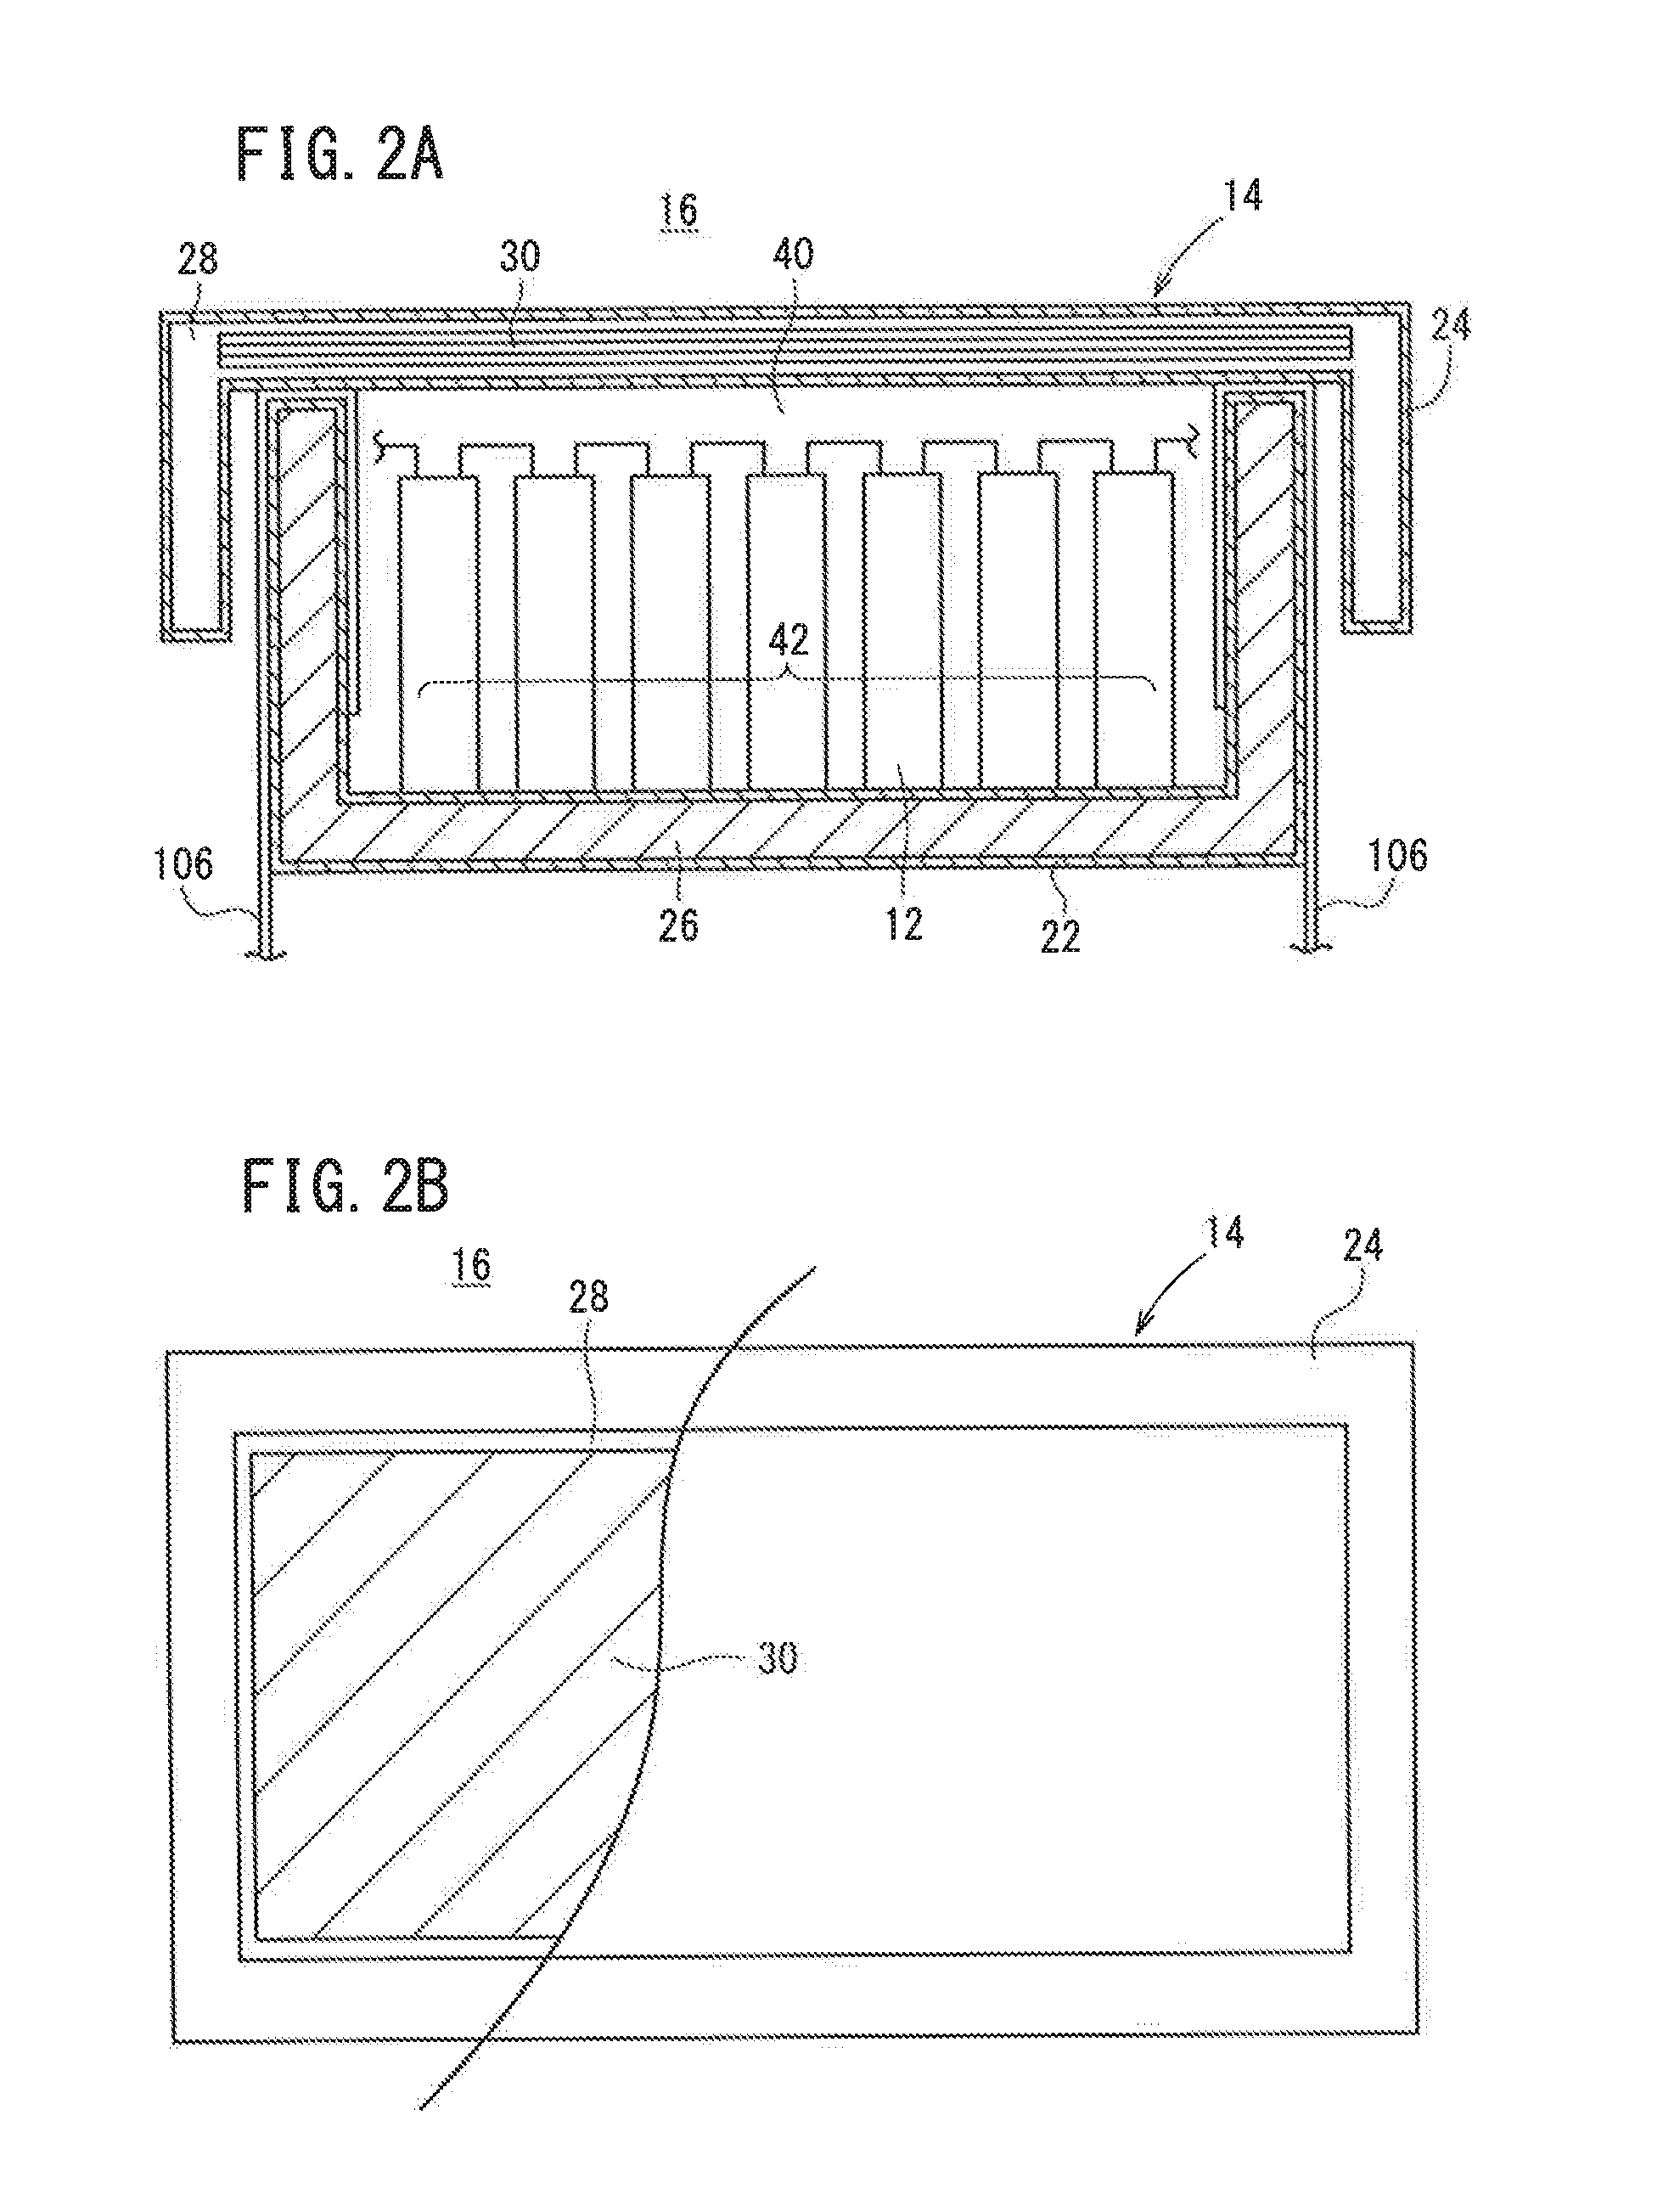 Secondary-battery system and secondary-battery-failure-detection system